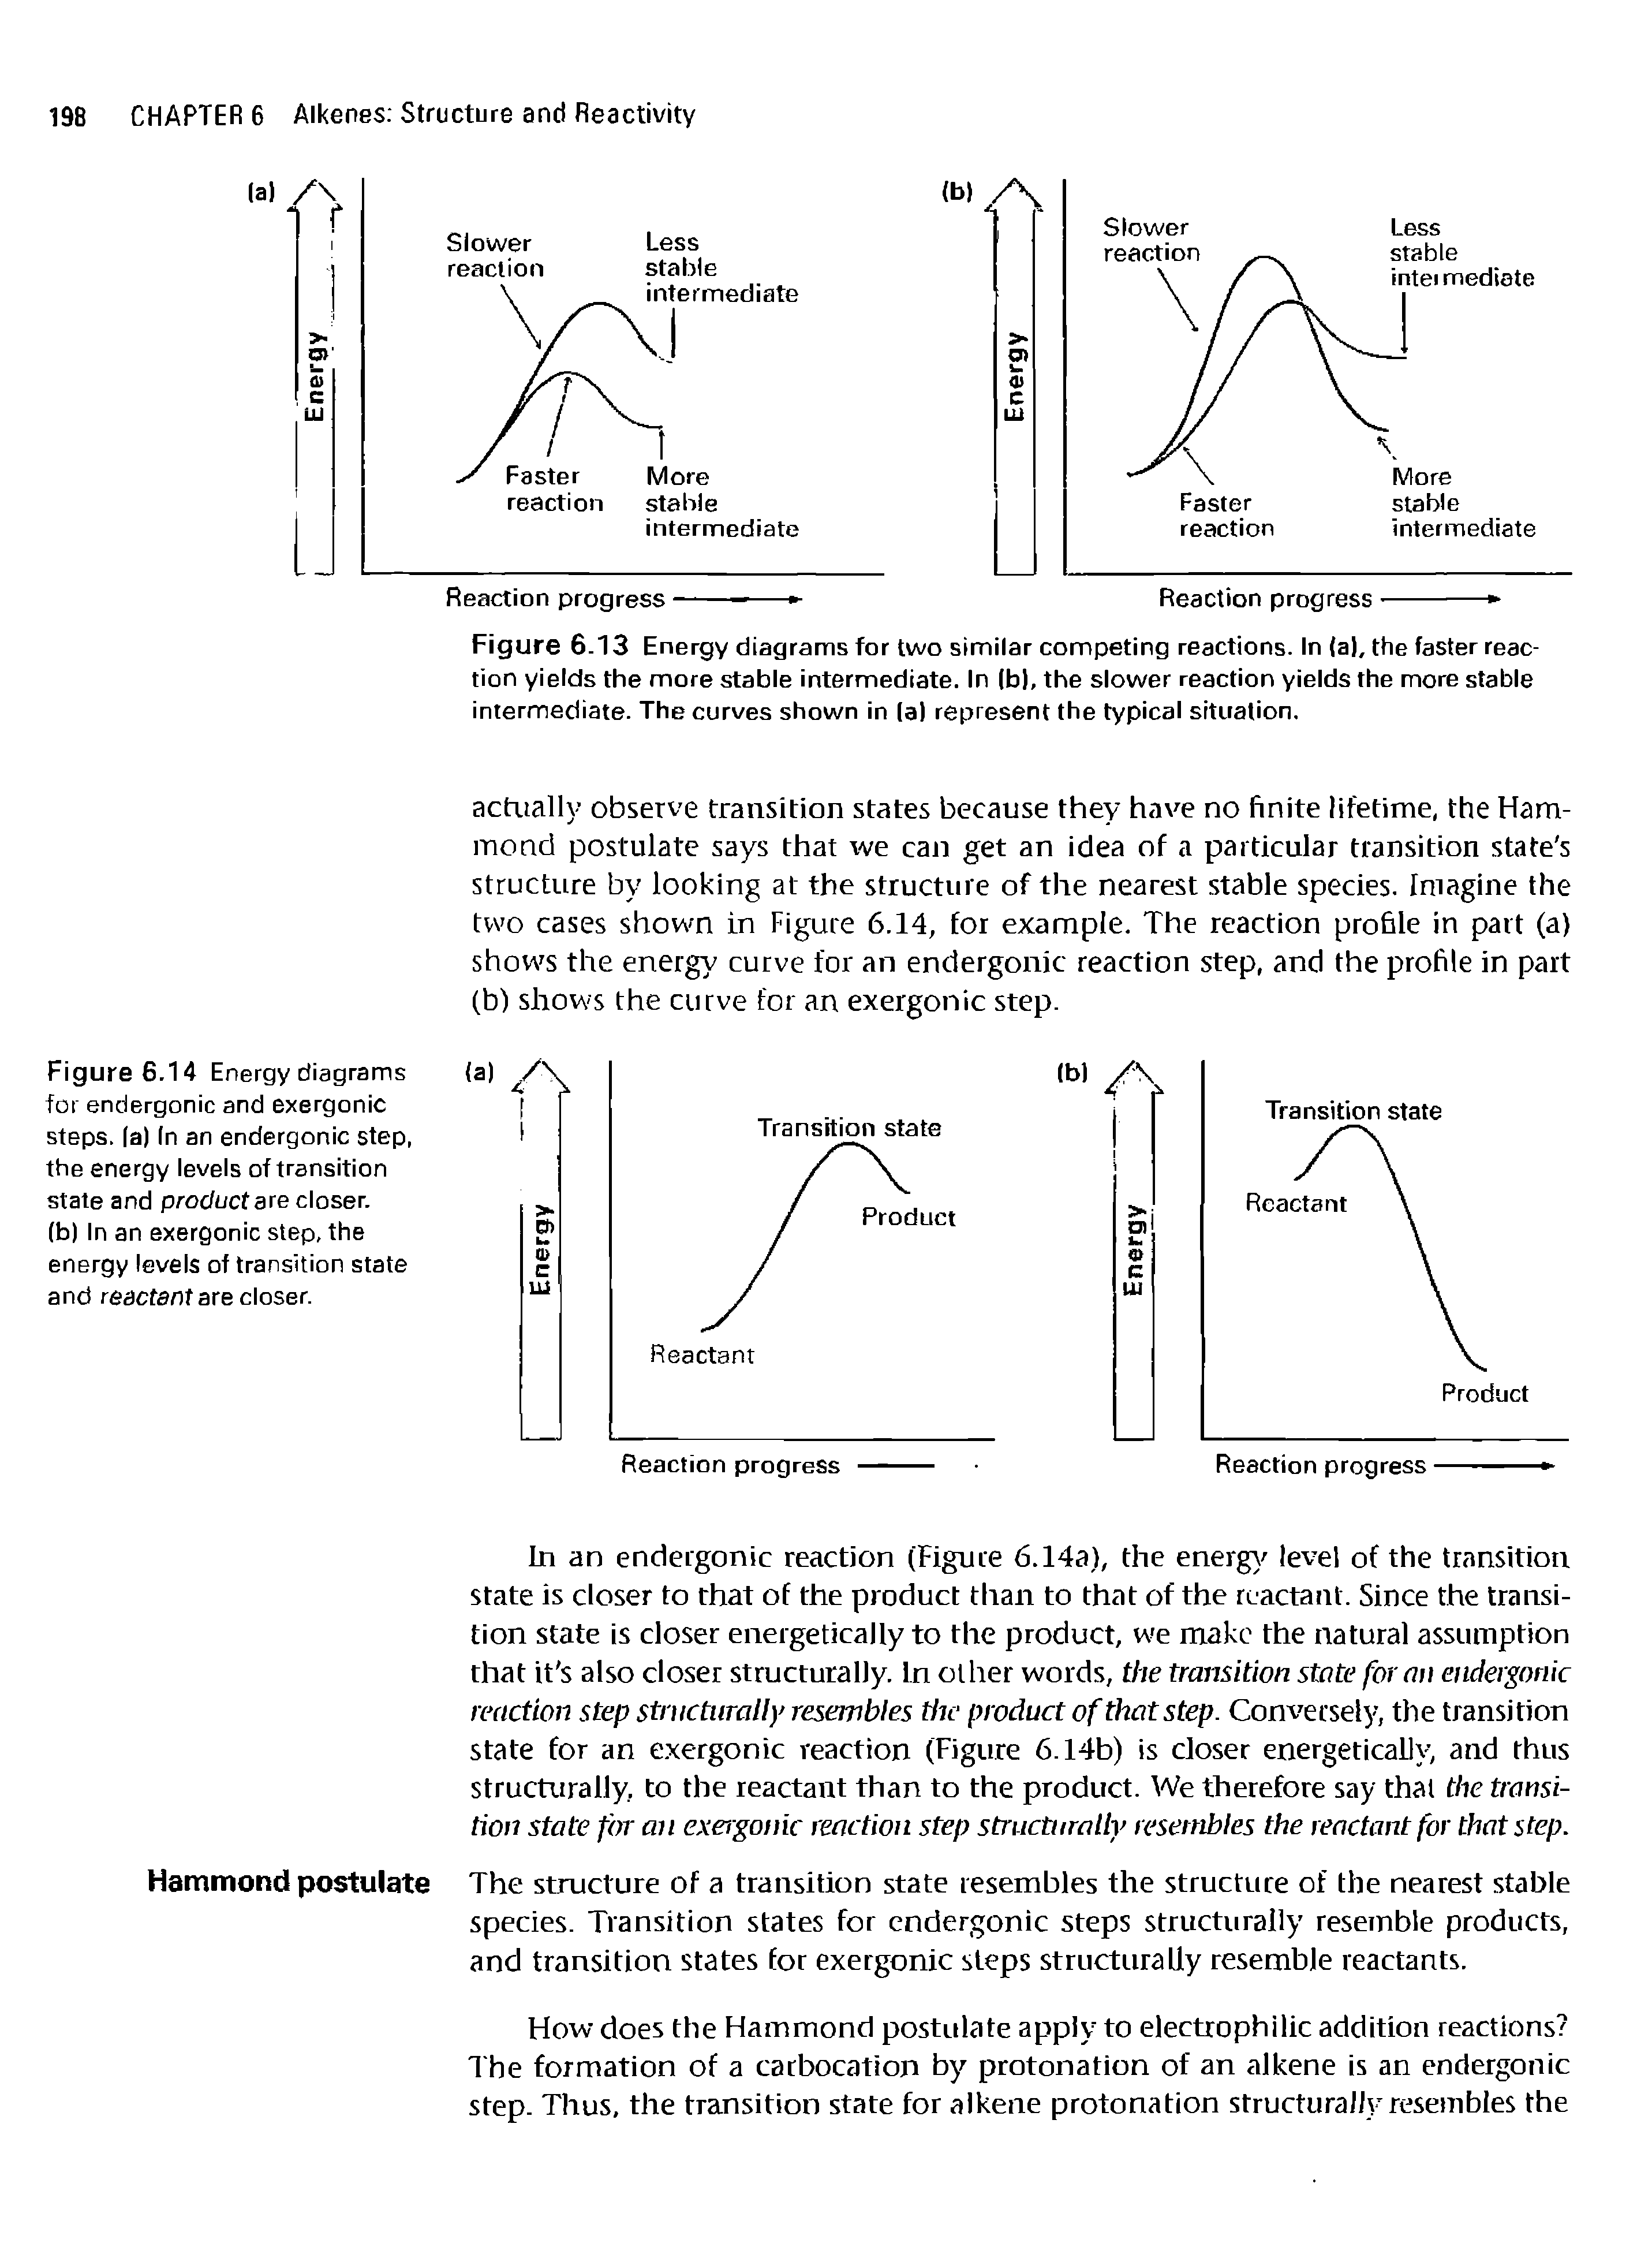 Figure 6.14 Energy diagrams for endergonic and exergonic steps, [a) In an endergonic step, the energy levels of transition state and product are closer.